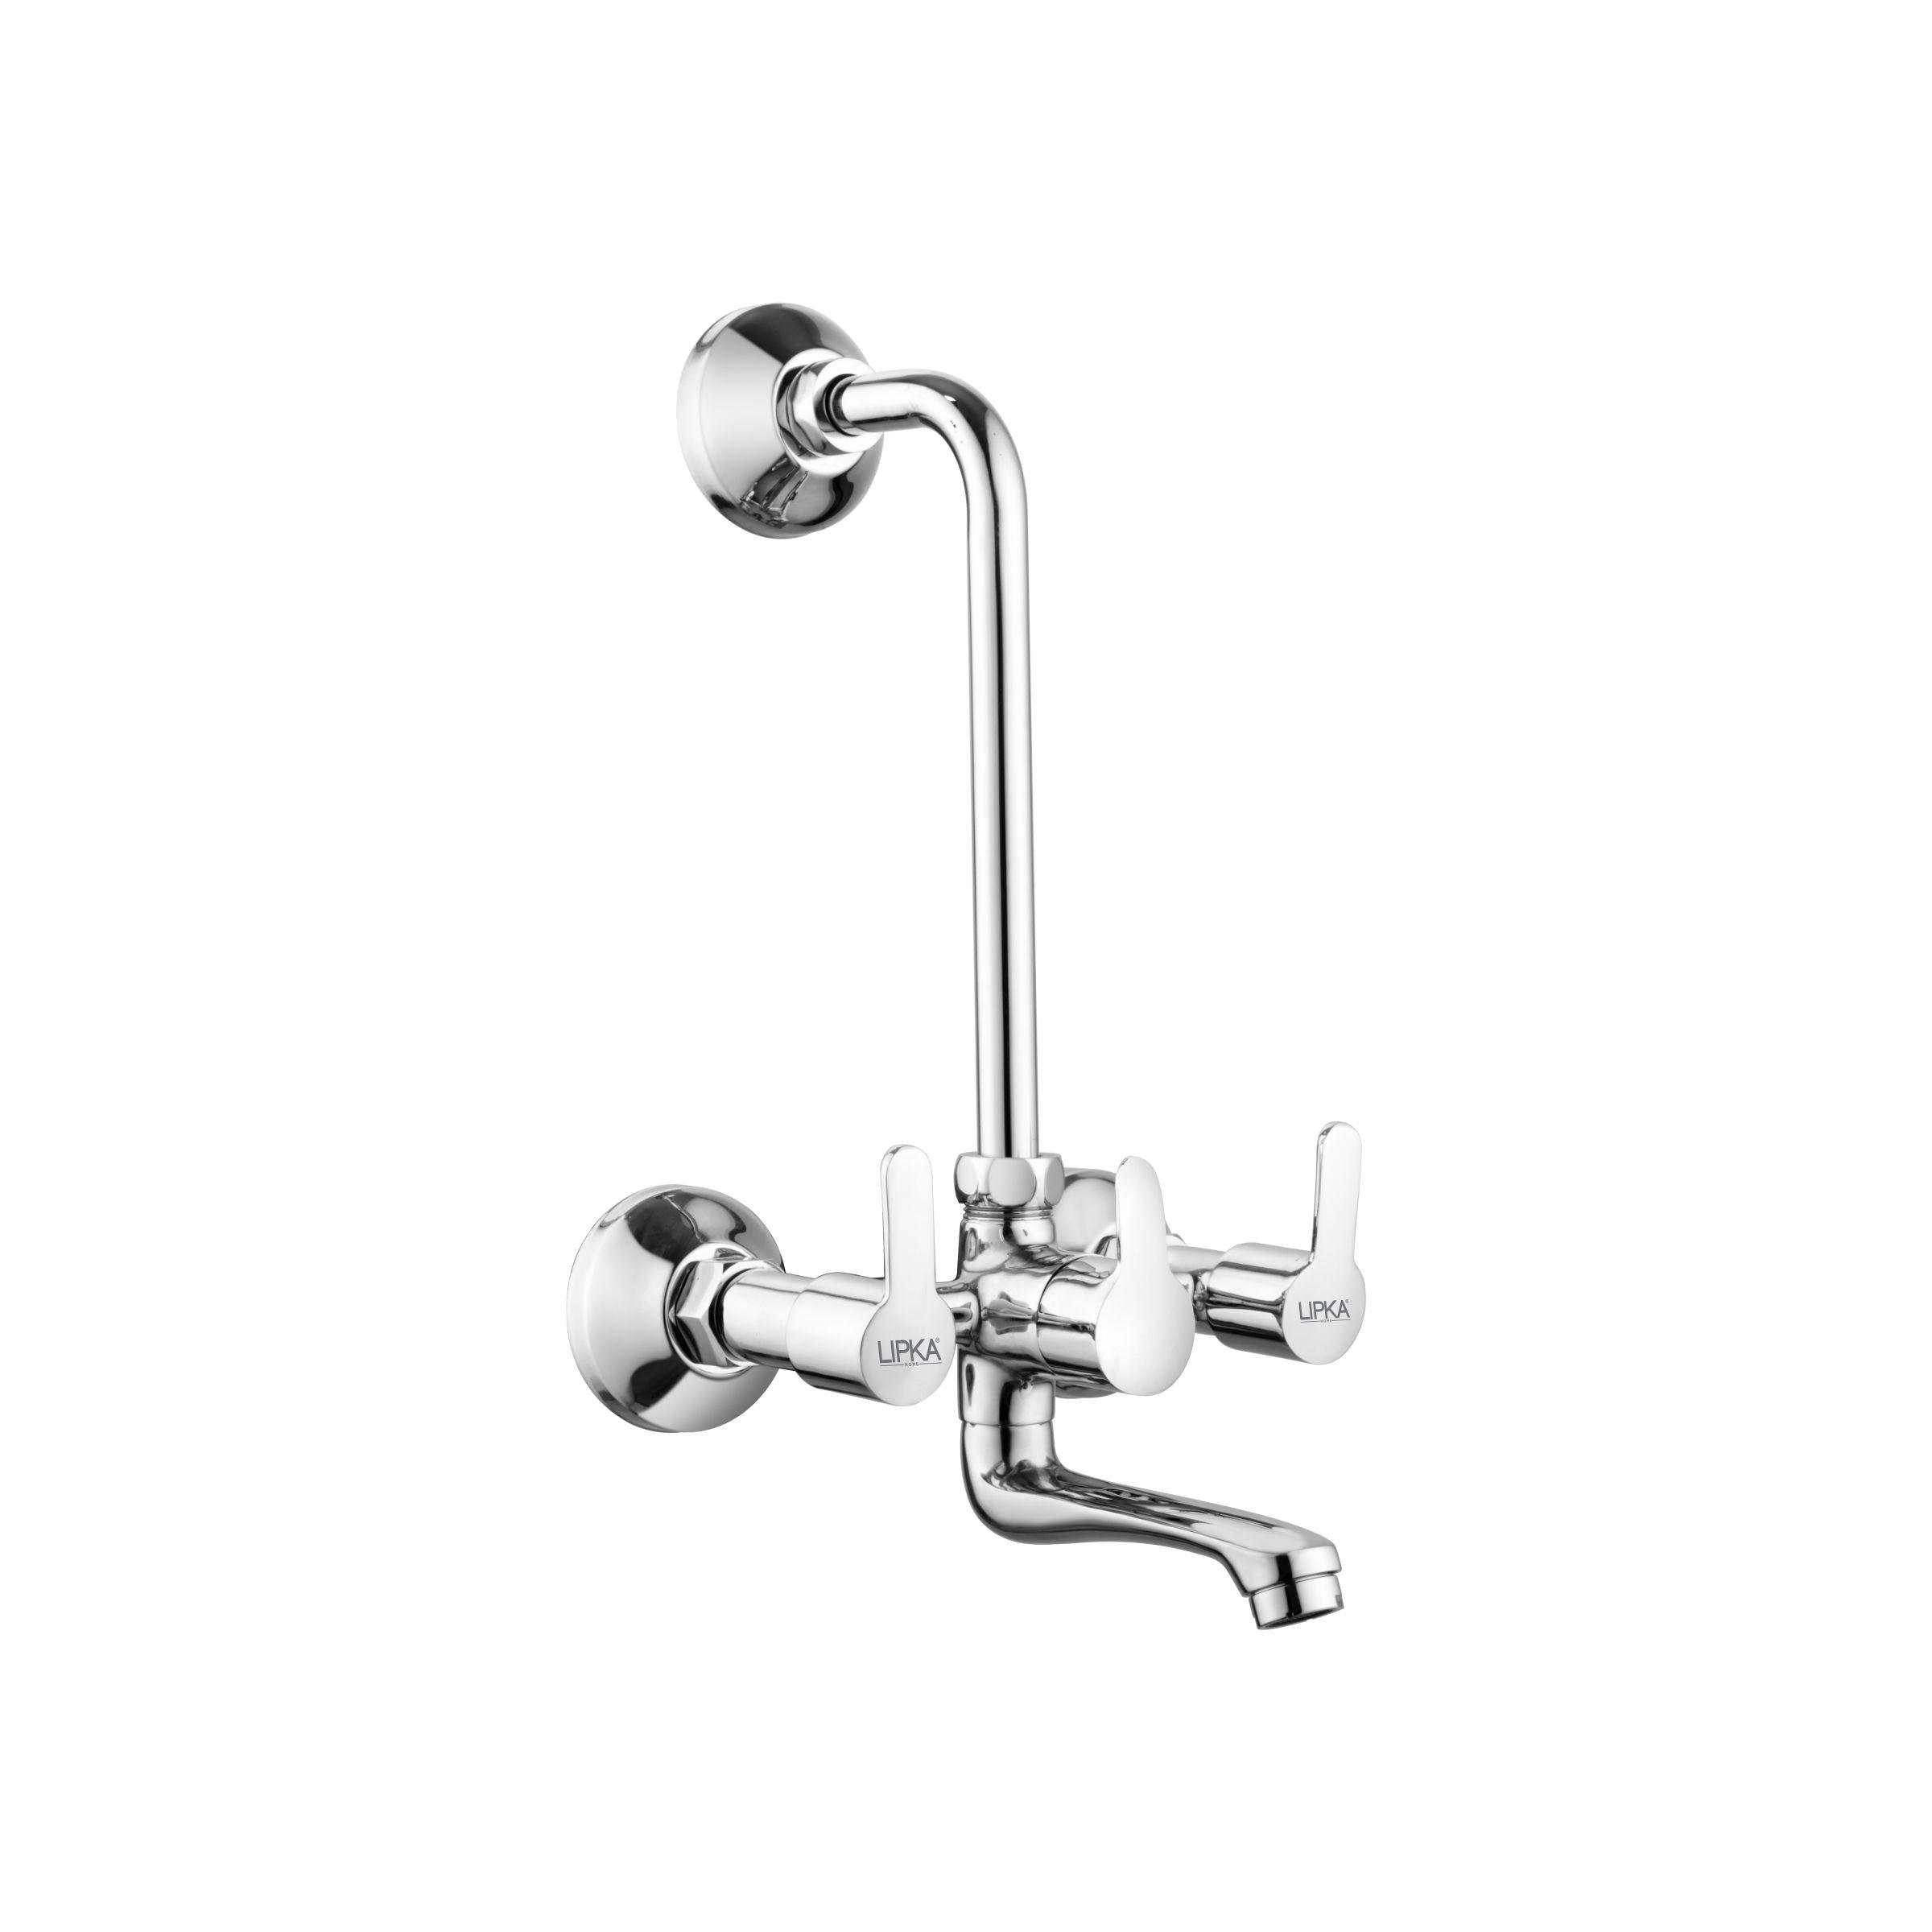 Frenk Wall Mixer with L Bend Faucet 